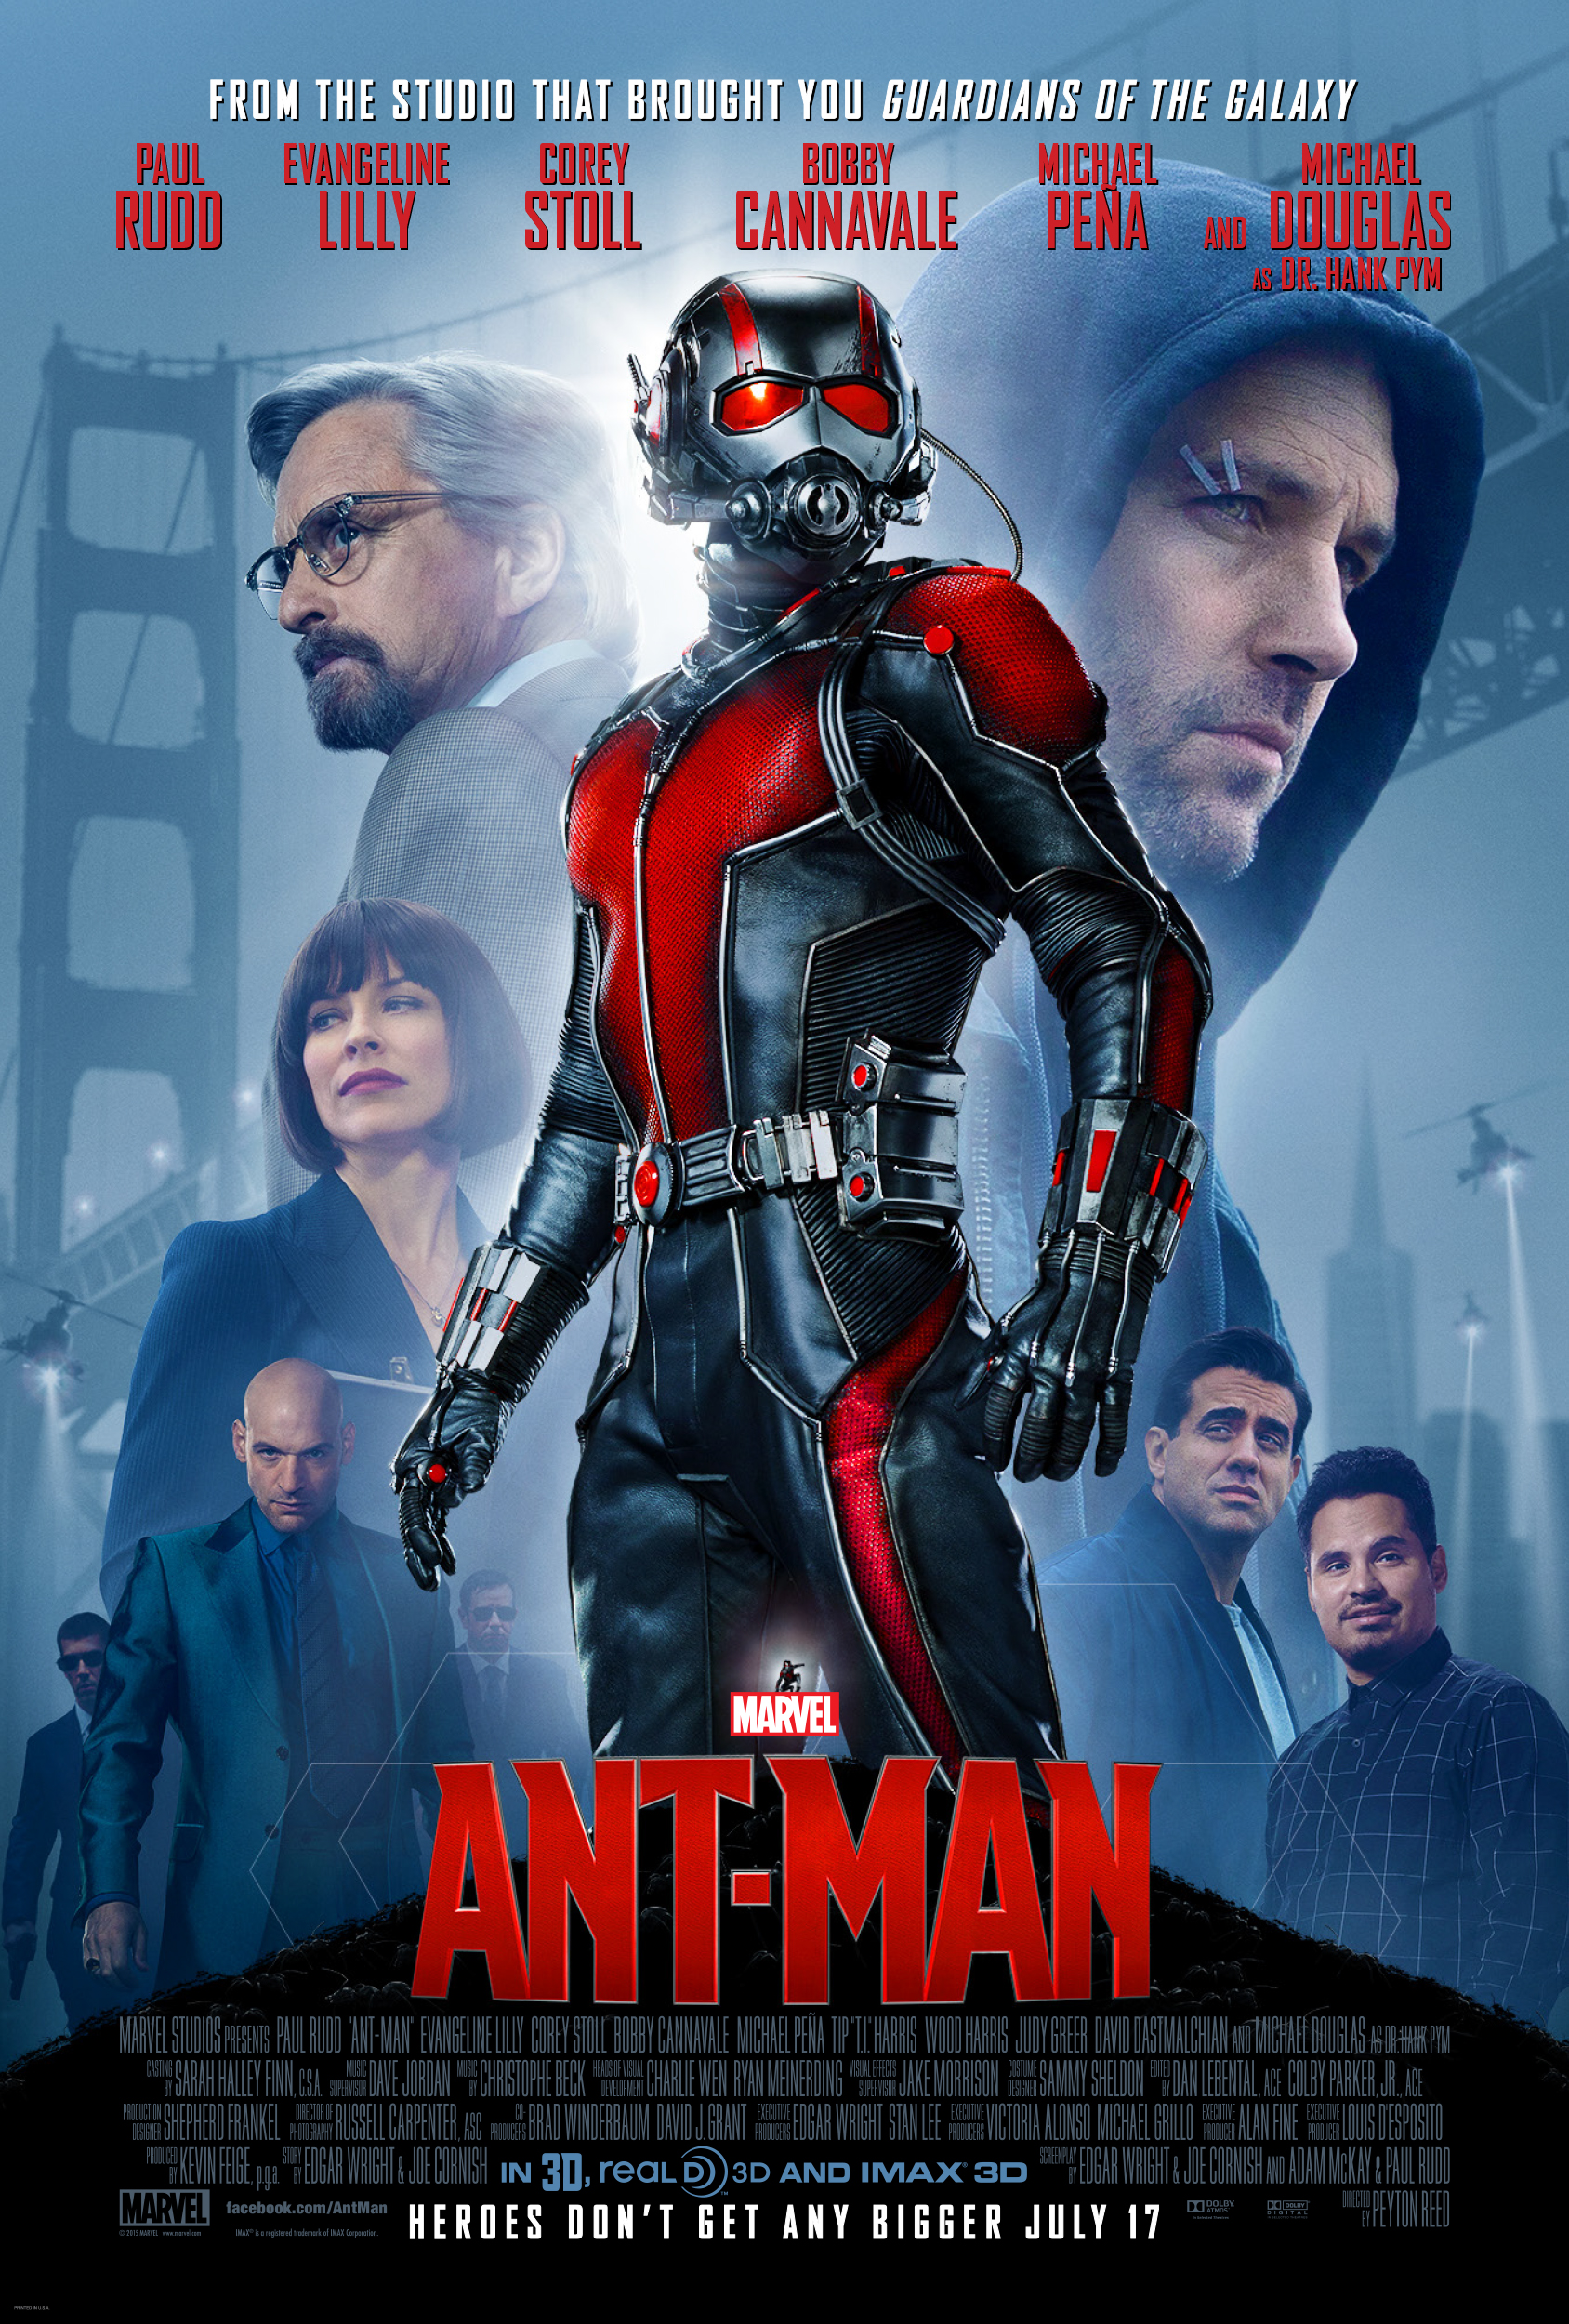 New Ant-Man Poster Released by Marvel